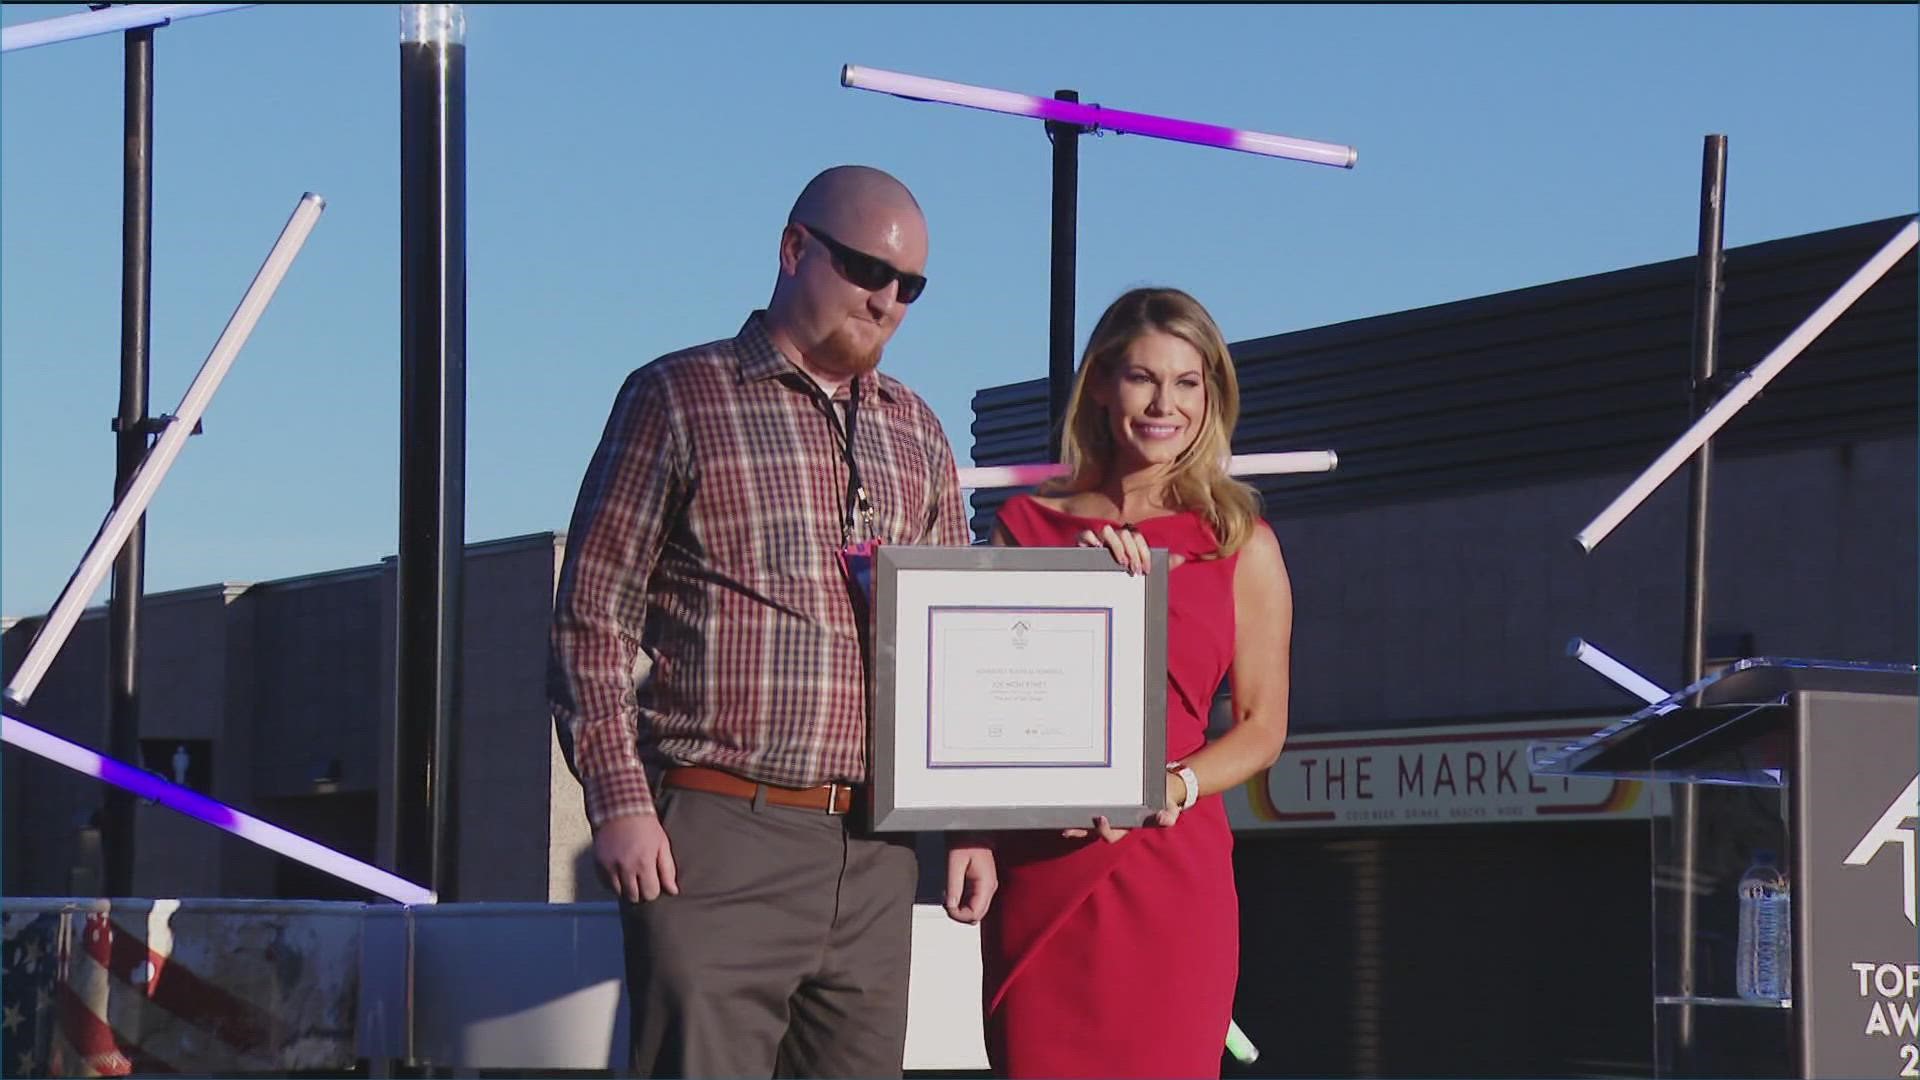 CBS 8 partnered up with the San Diego 'Top Tech Awards' for their 15th annual celebration.